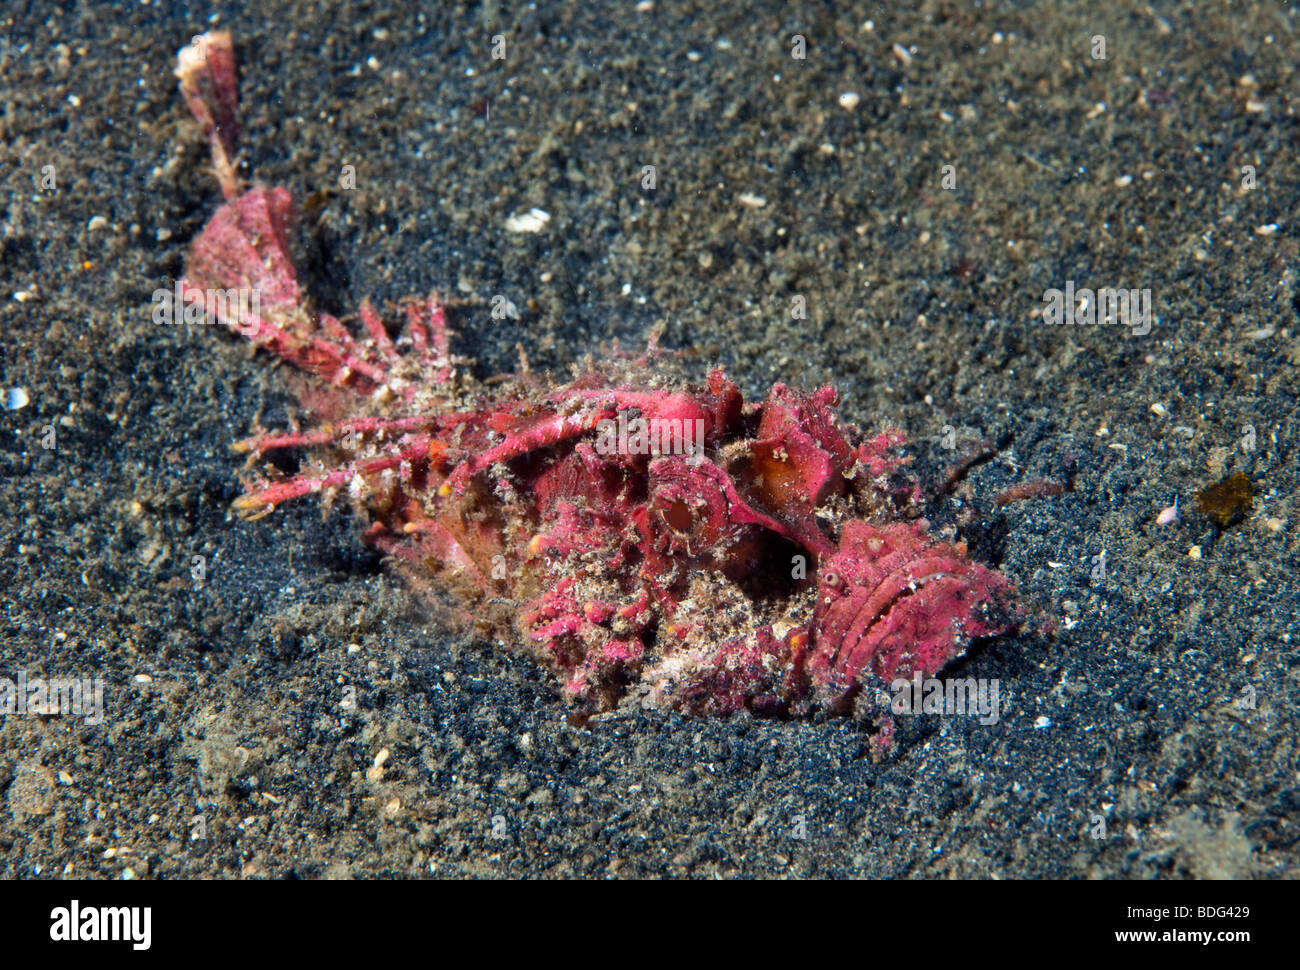 Bearded ghoul fish, Spiny devilfish (Inimicus didactylus), dug in sand, Lembeh Strait, Sulawesi, Indonesia, Southeast Asia Stock Photo